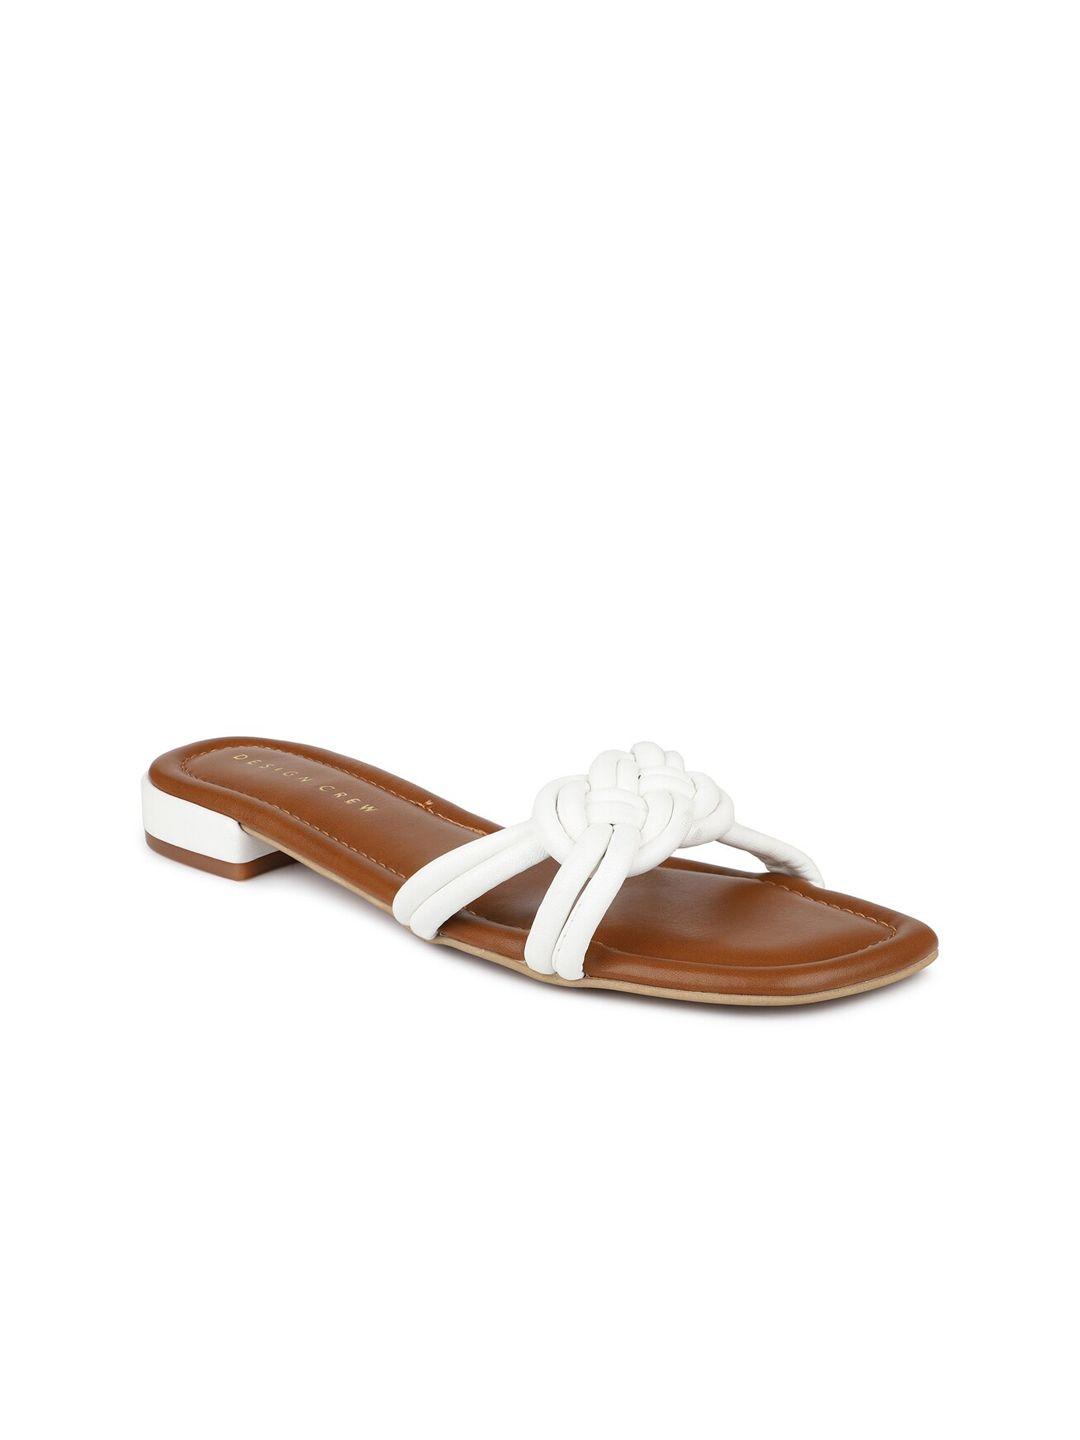 design crew women white open toe flats with bows